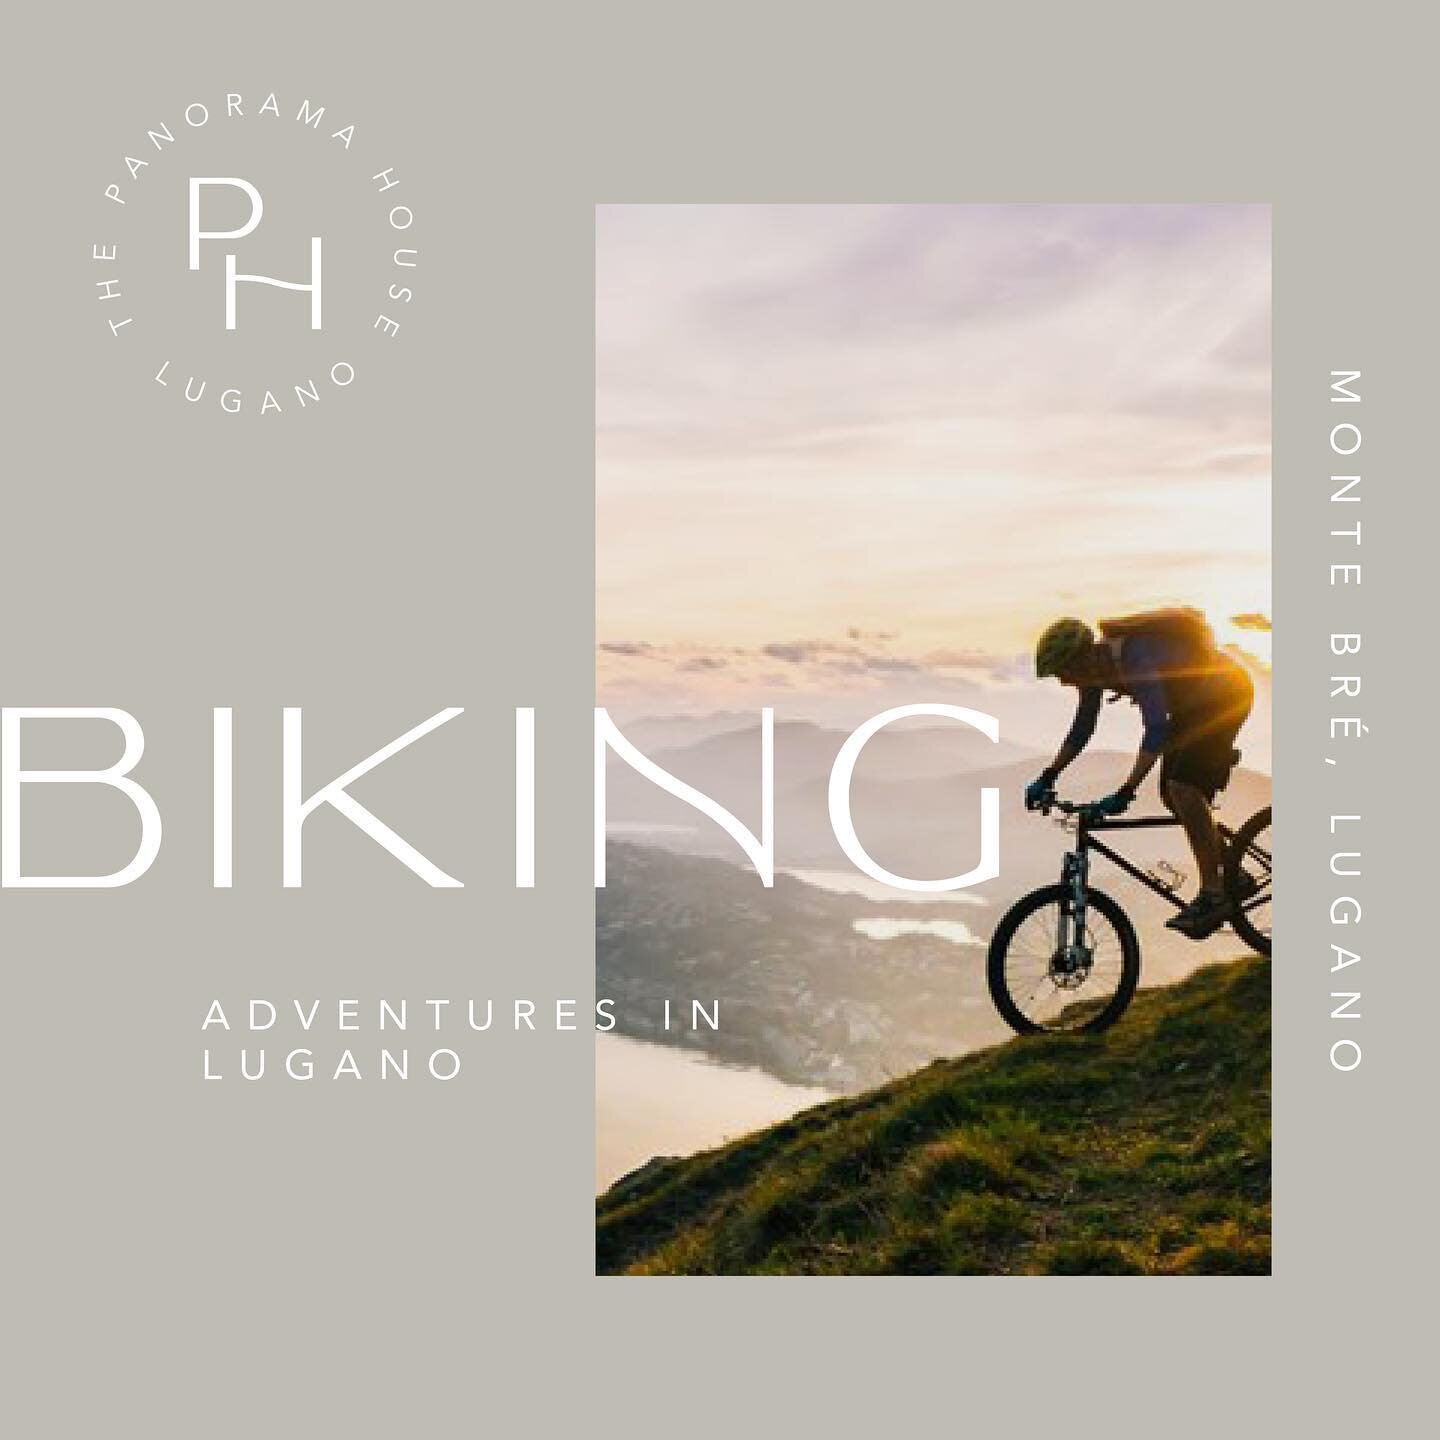 For those who enjoy an active vacation in Switzerland:
Choose your racing bike, mtb or e-bike and enjoy Lugano and it&rsquo;s surrounding mountains. Get the view🤩.

#lugano #thepanoramahouselugano #holidayhome #bnb #mtb #bike #bikersofinstagram #ebi